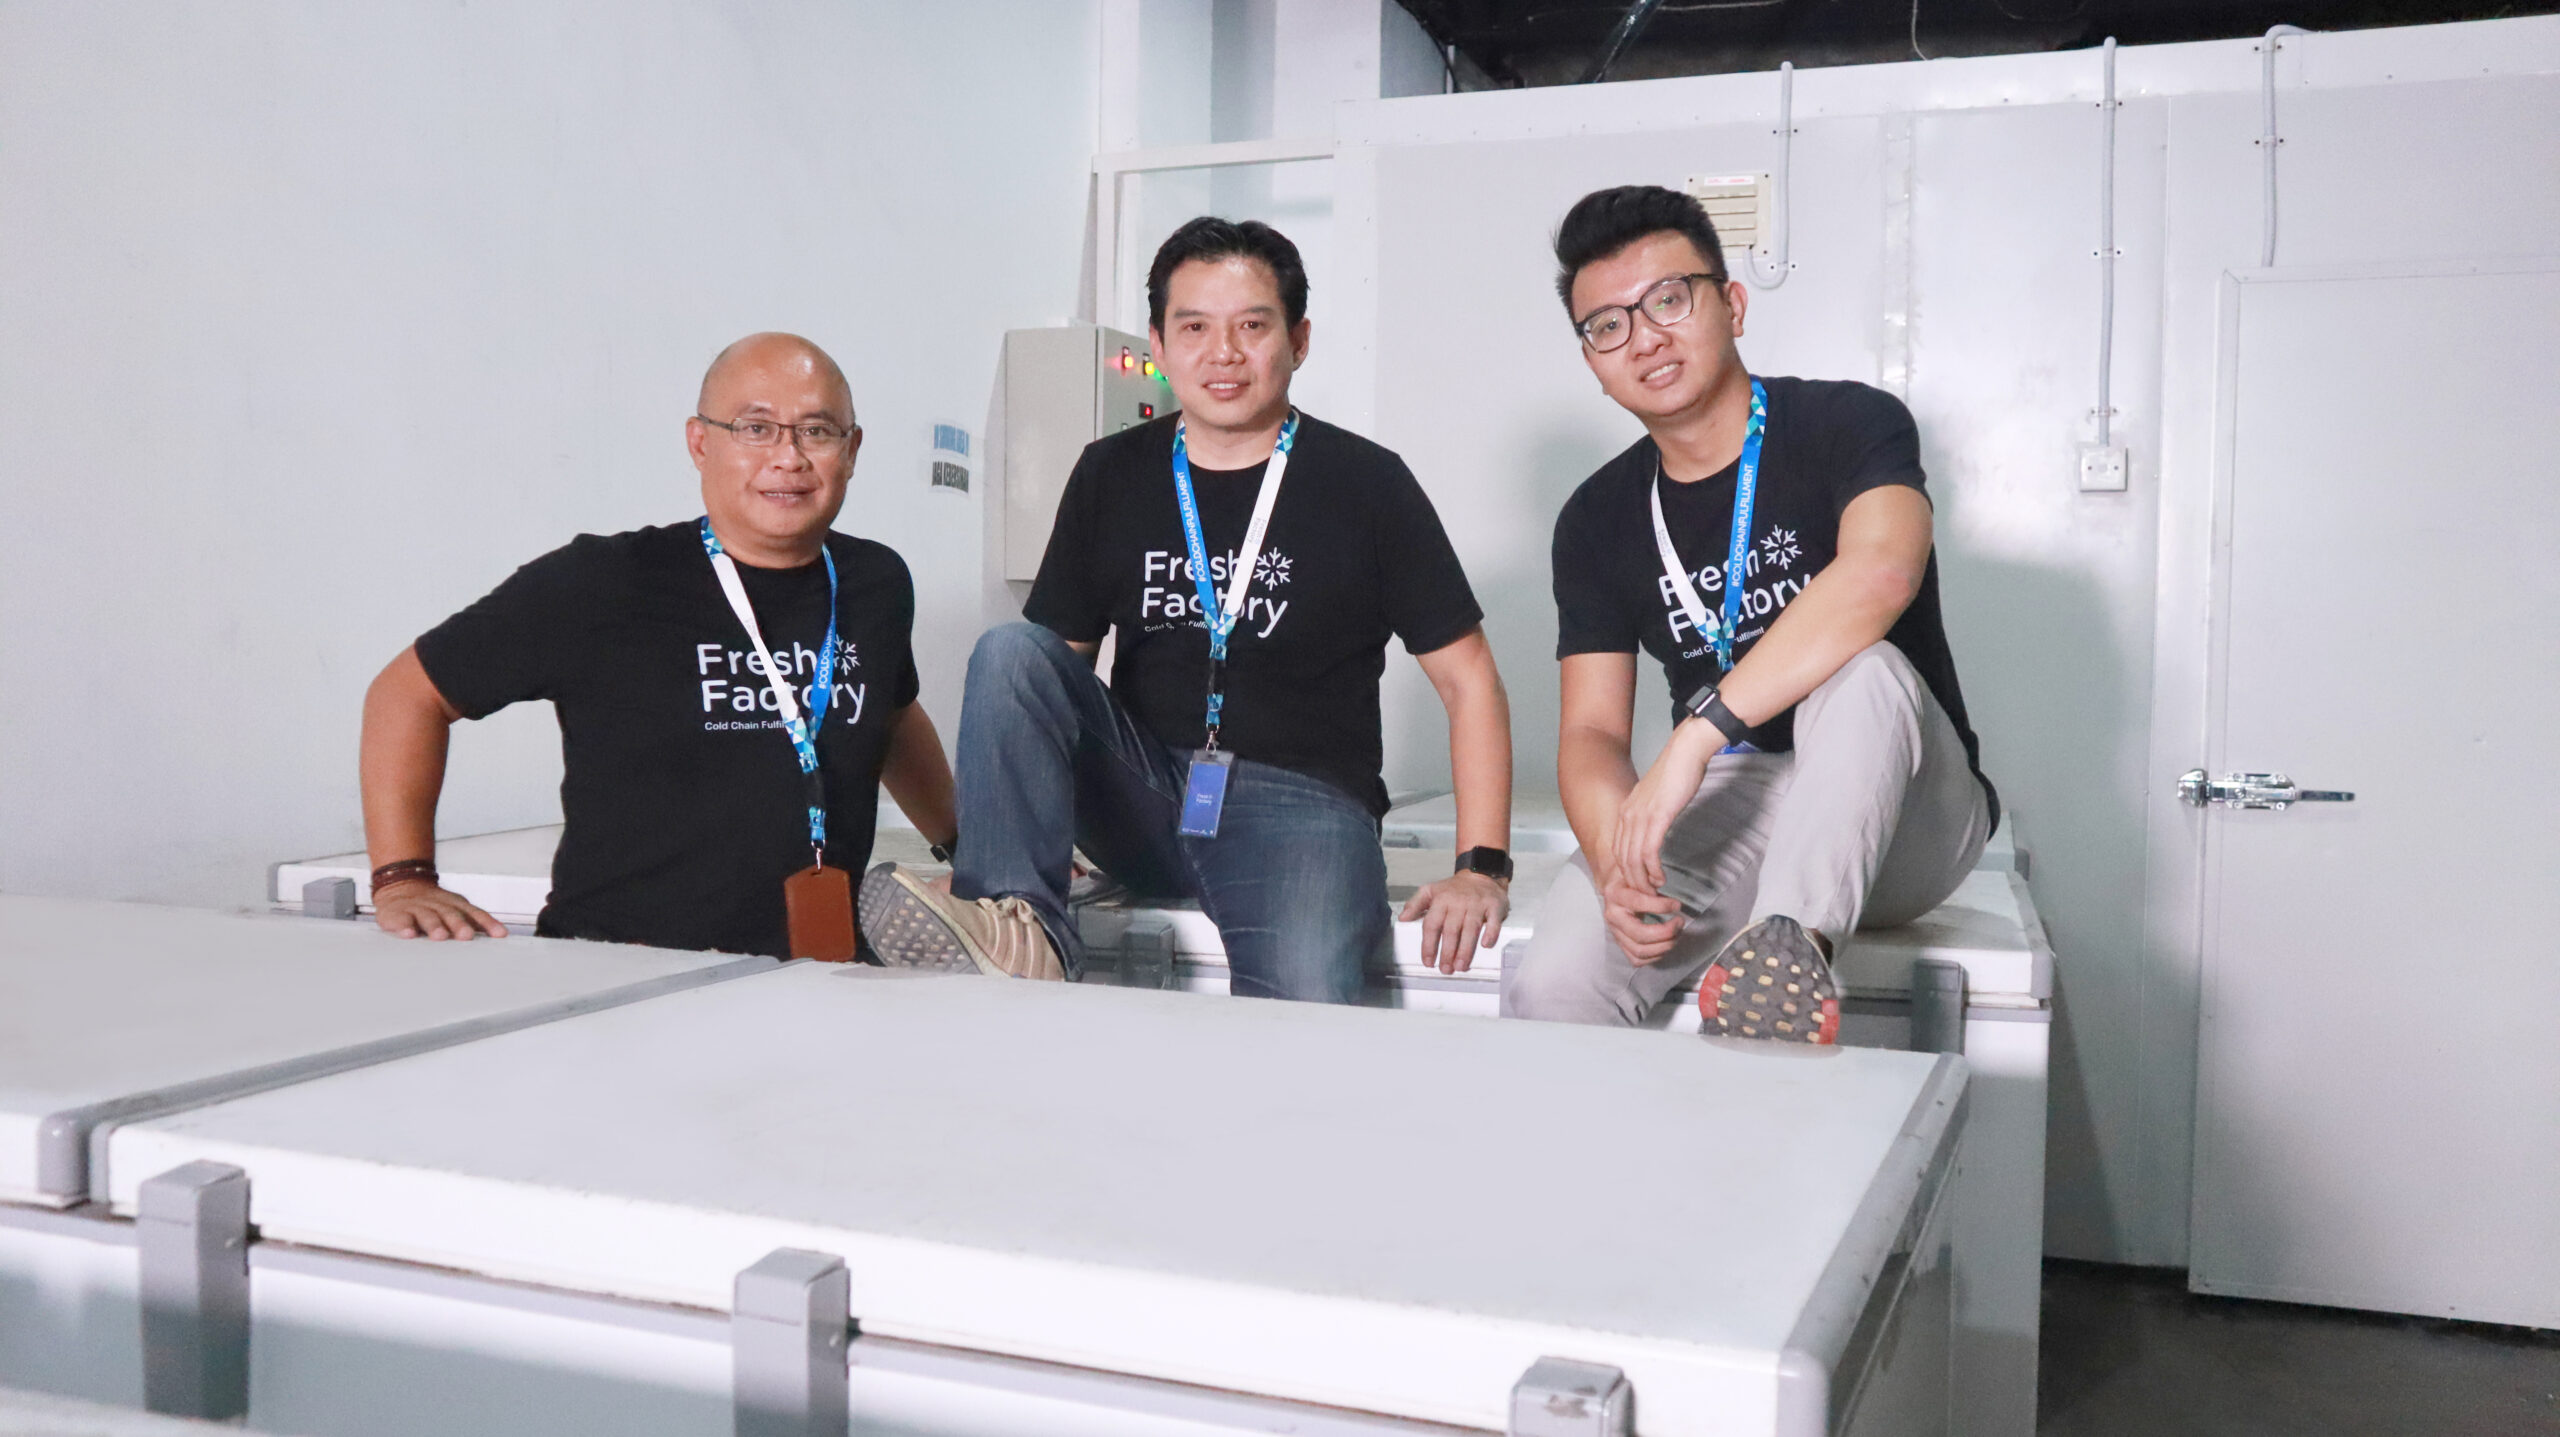 Indonesia’s Fresh Factory raises $4.15M in pre-Series A funding led by SBI Ven Capital